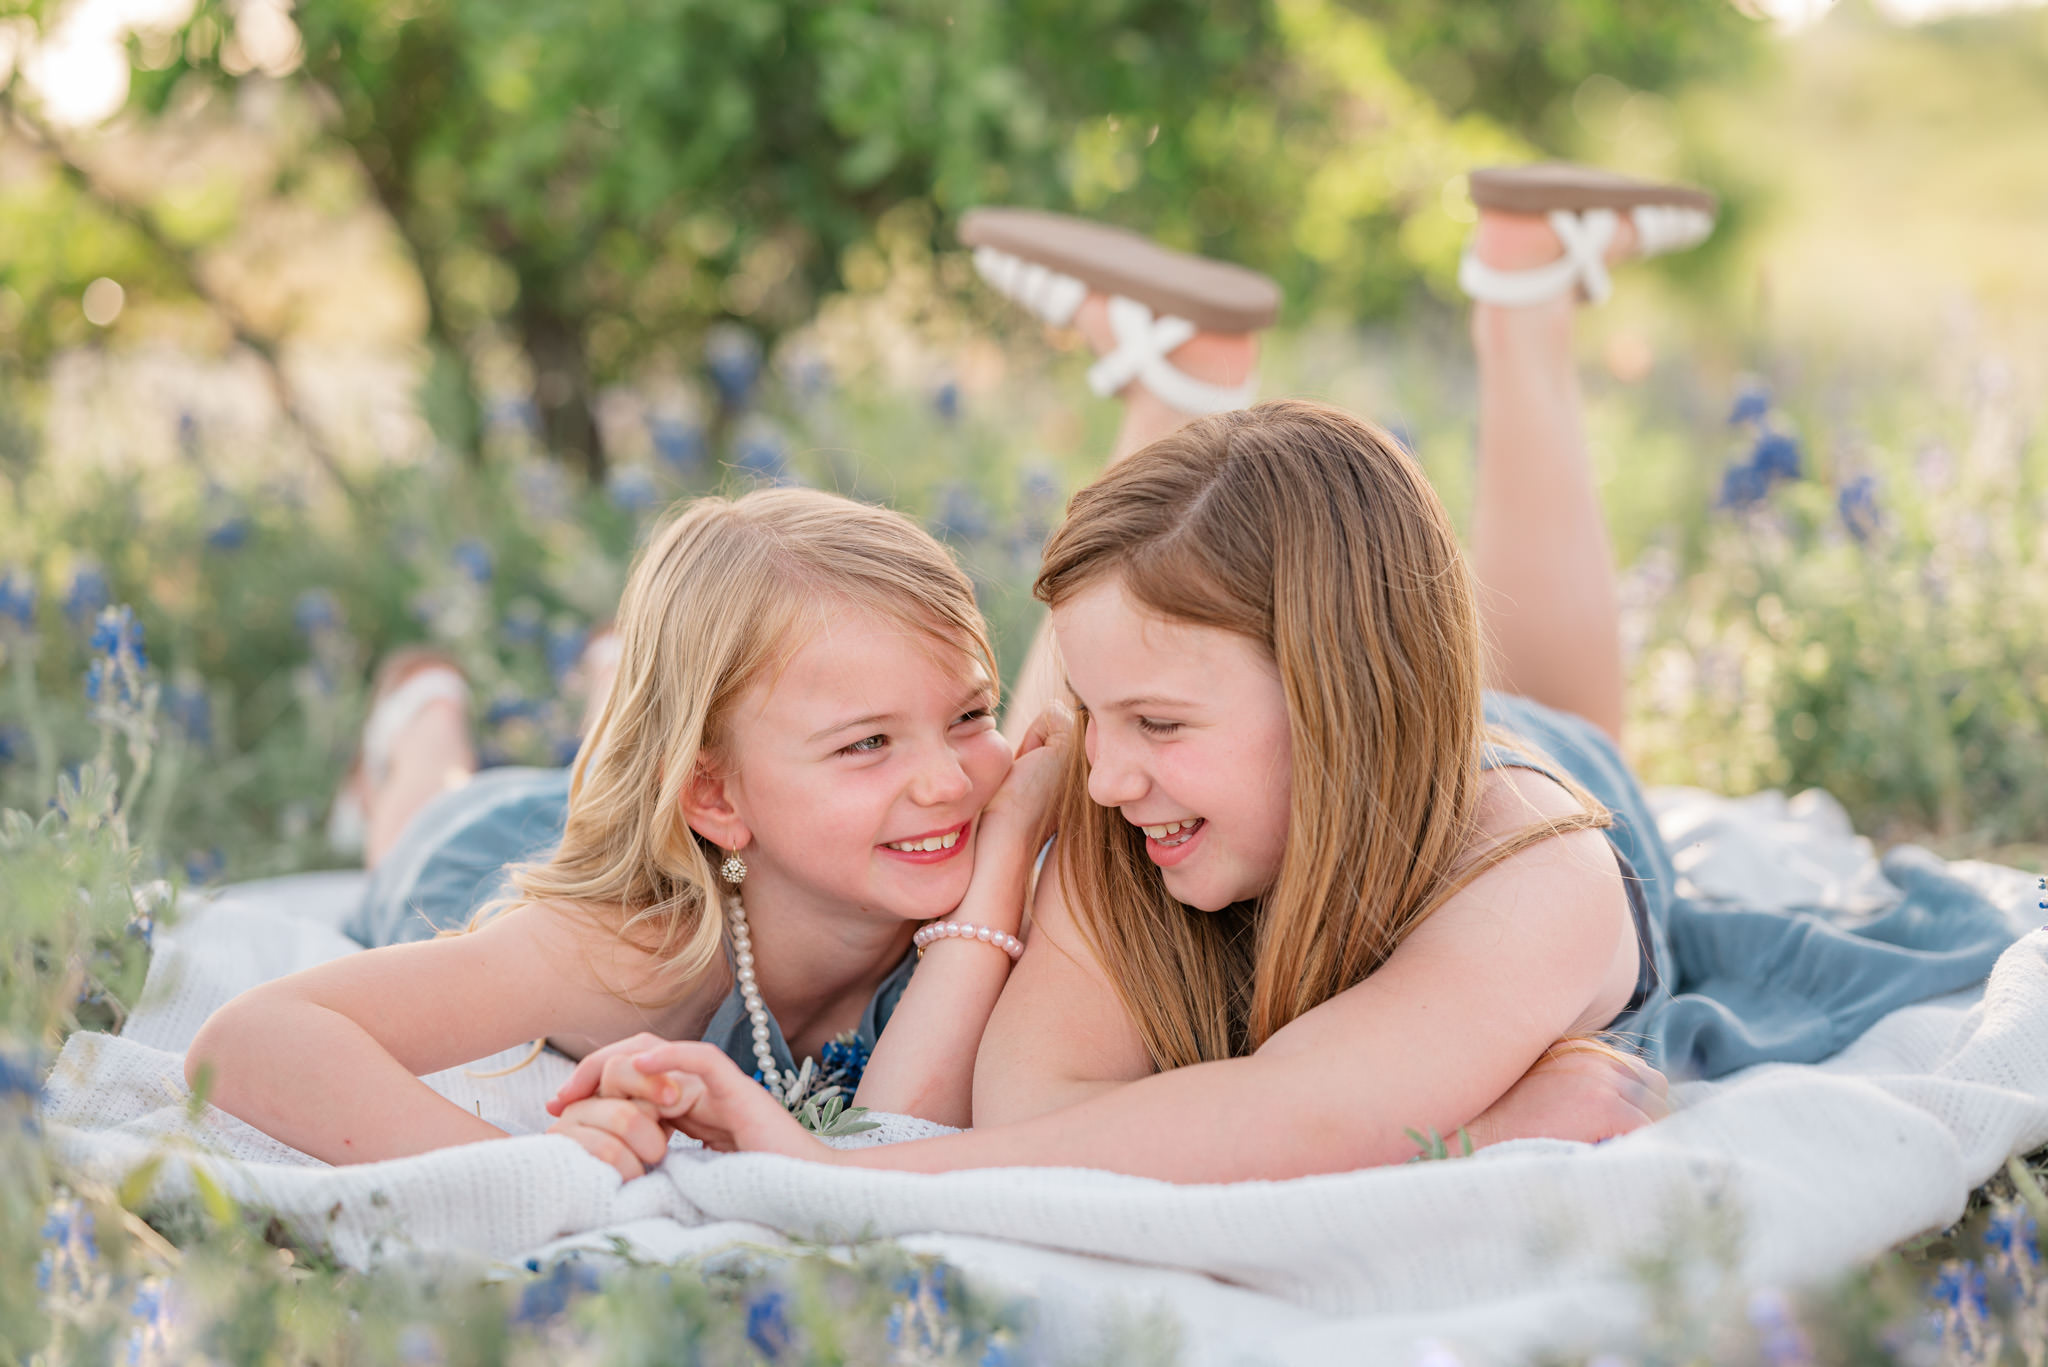 Two sisters whisper and laugh on a blanket among bluebonnets.